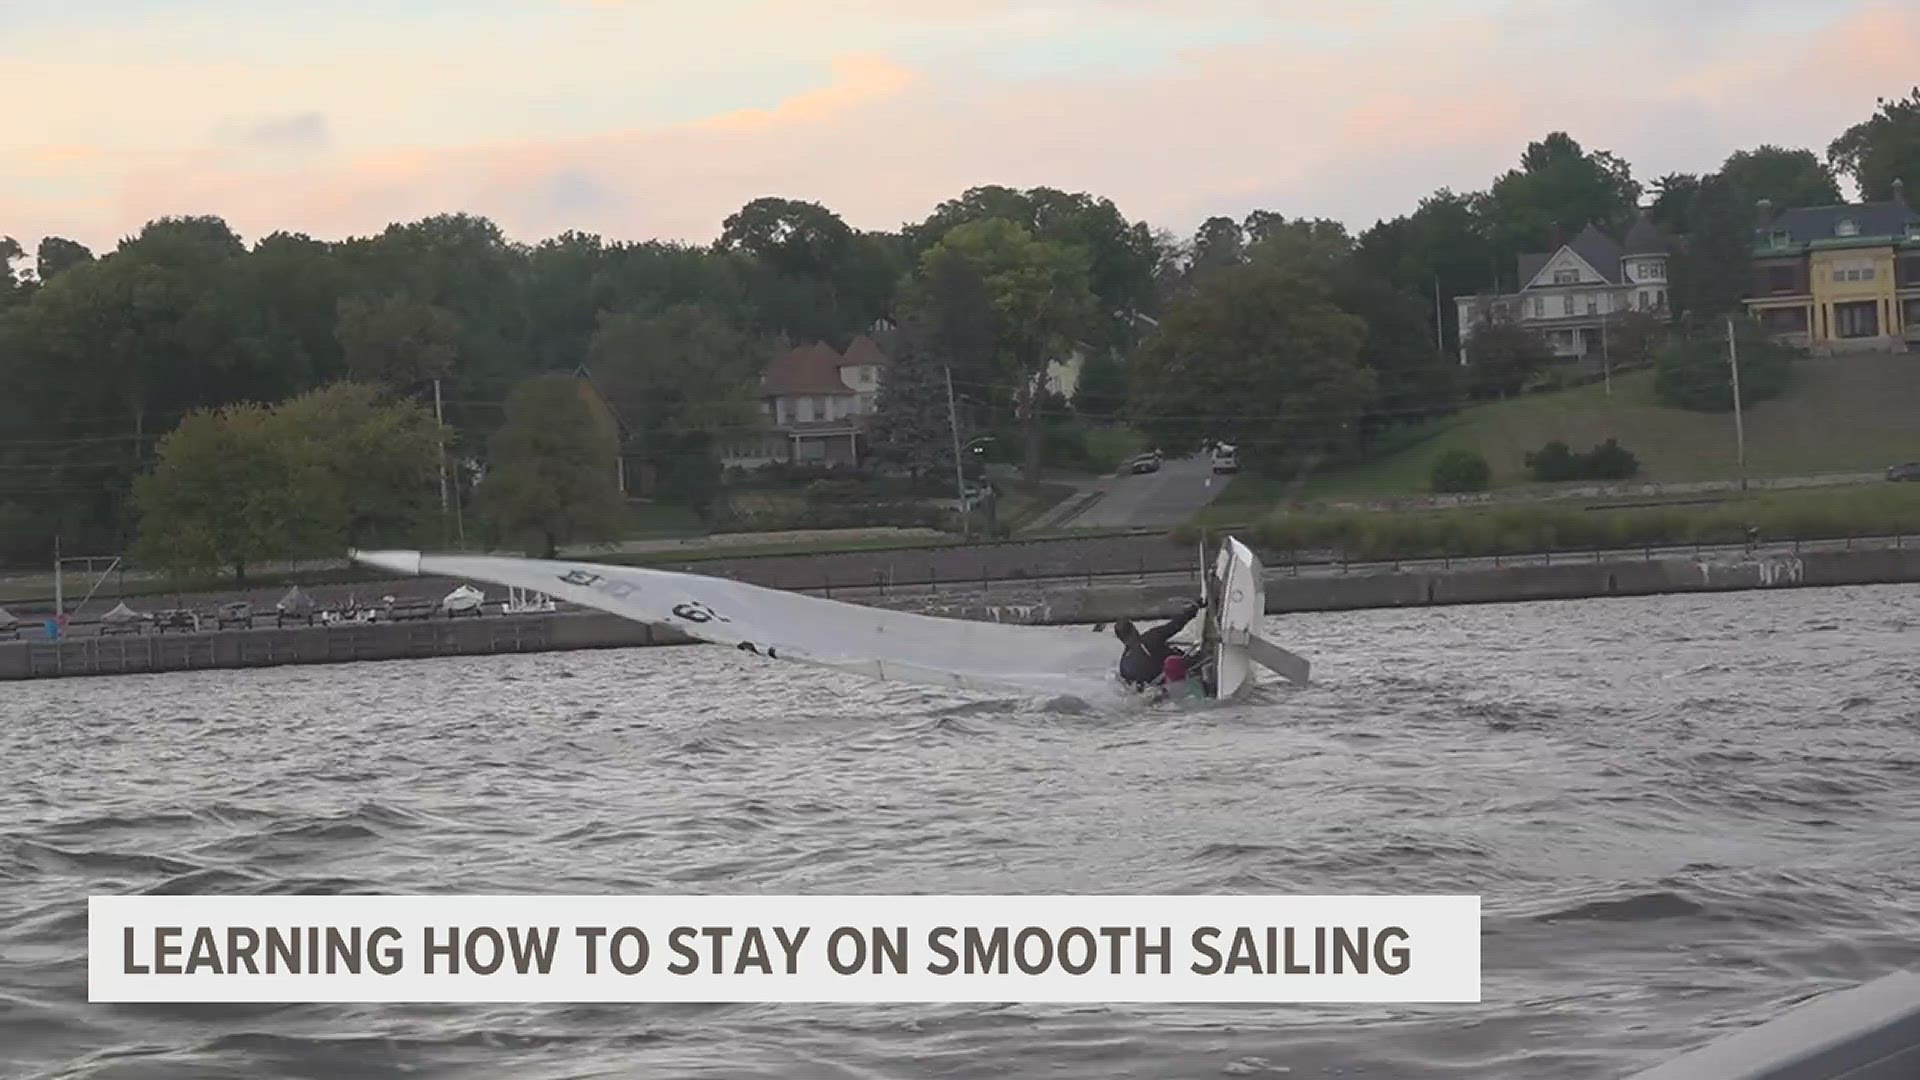 Roughly a dozen boaters learned what to do if their boat takes on a bit more water than they expect.